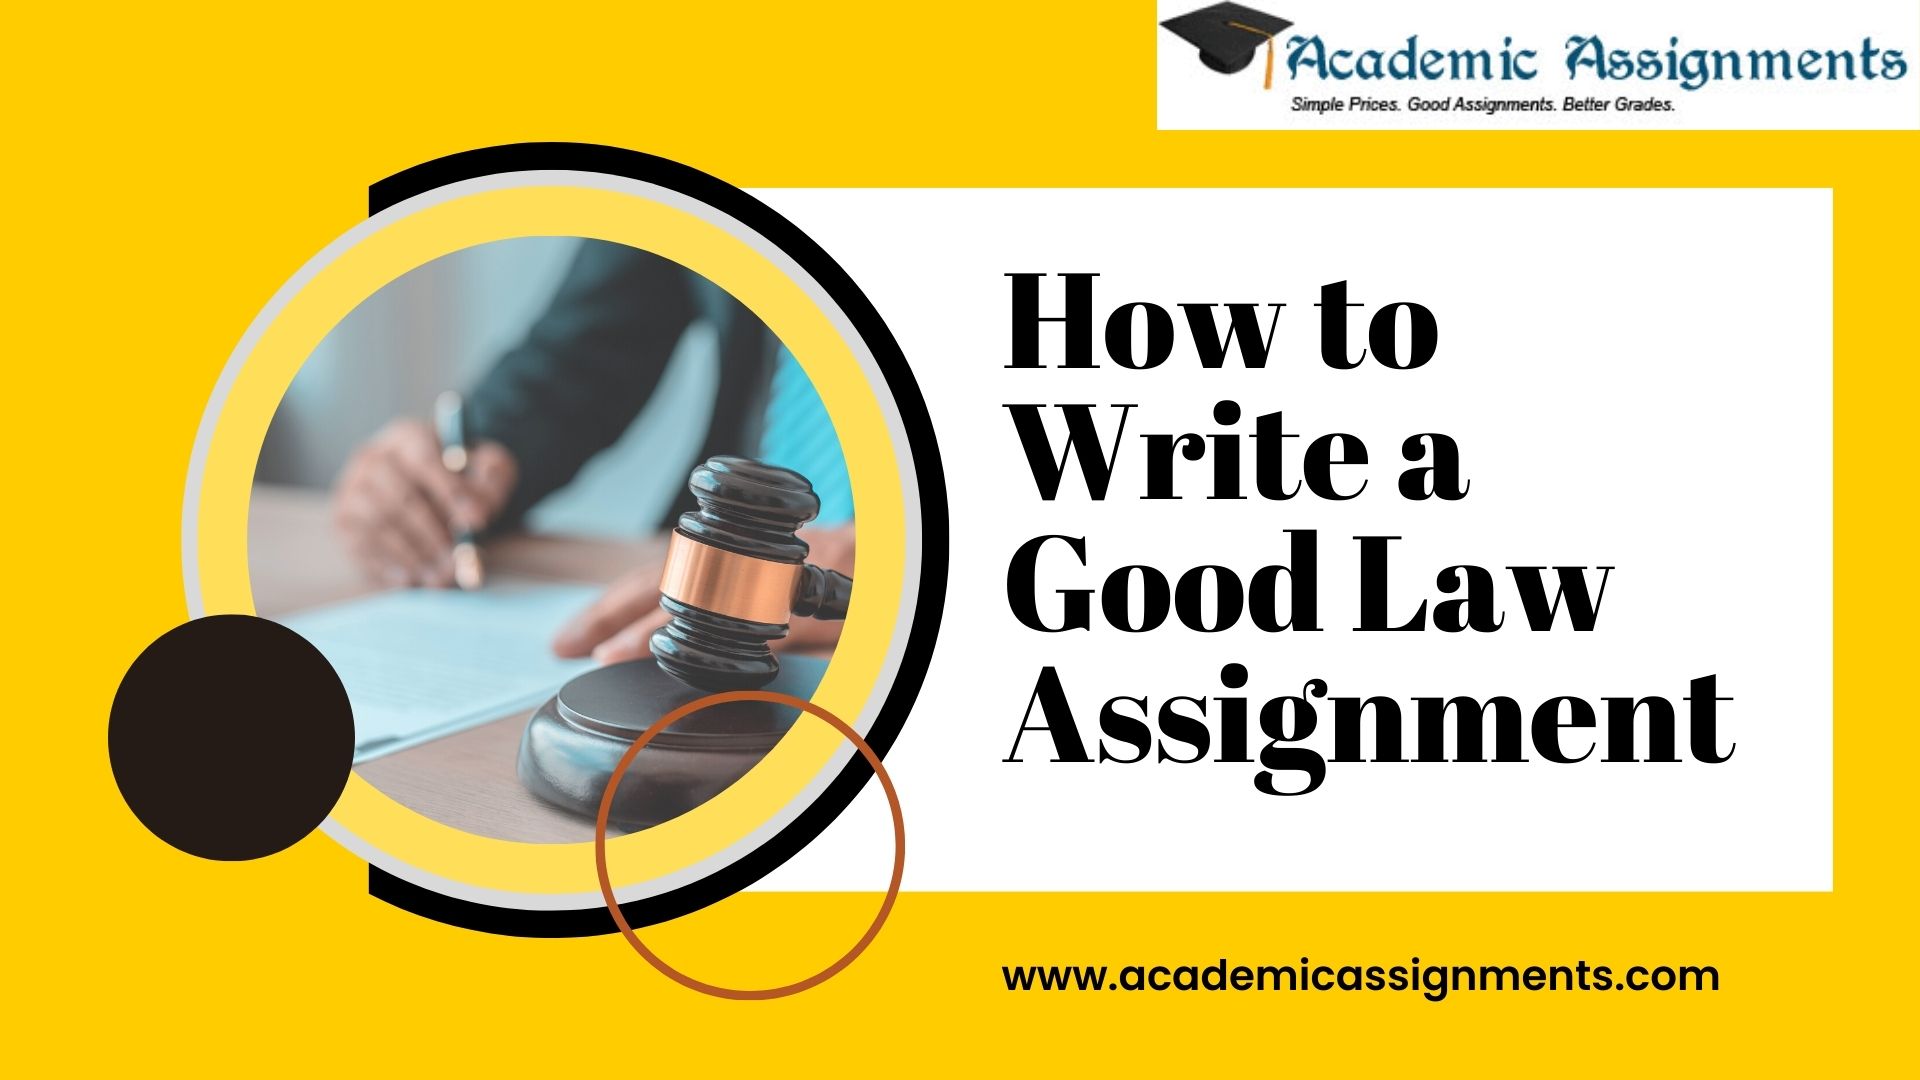 How to Write a Good Law Assignment